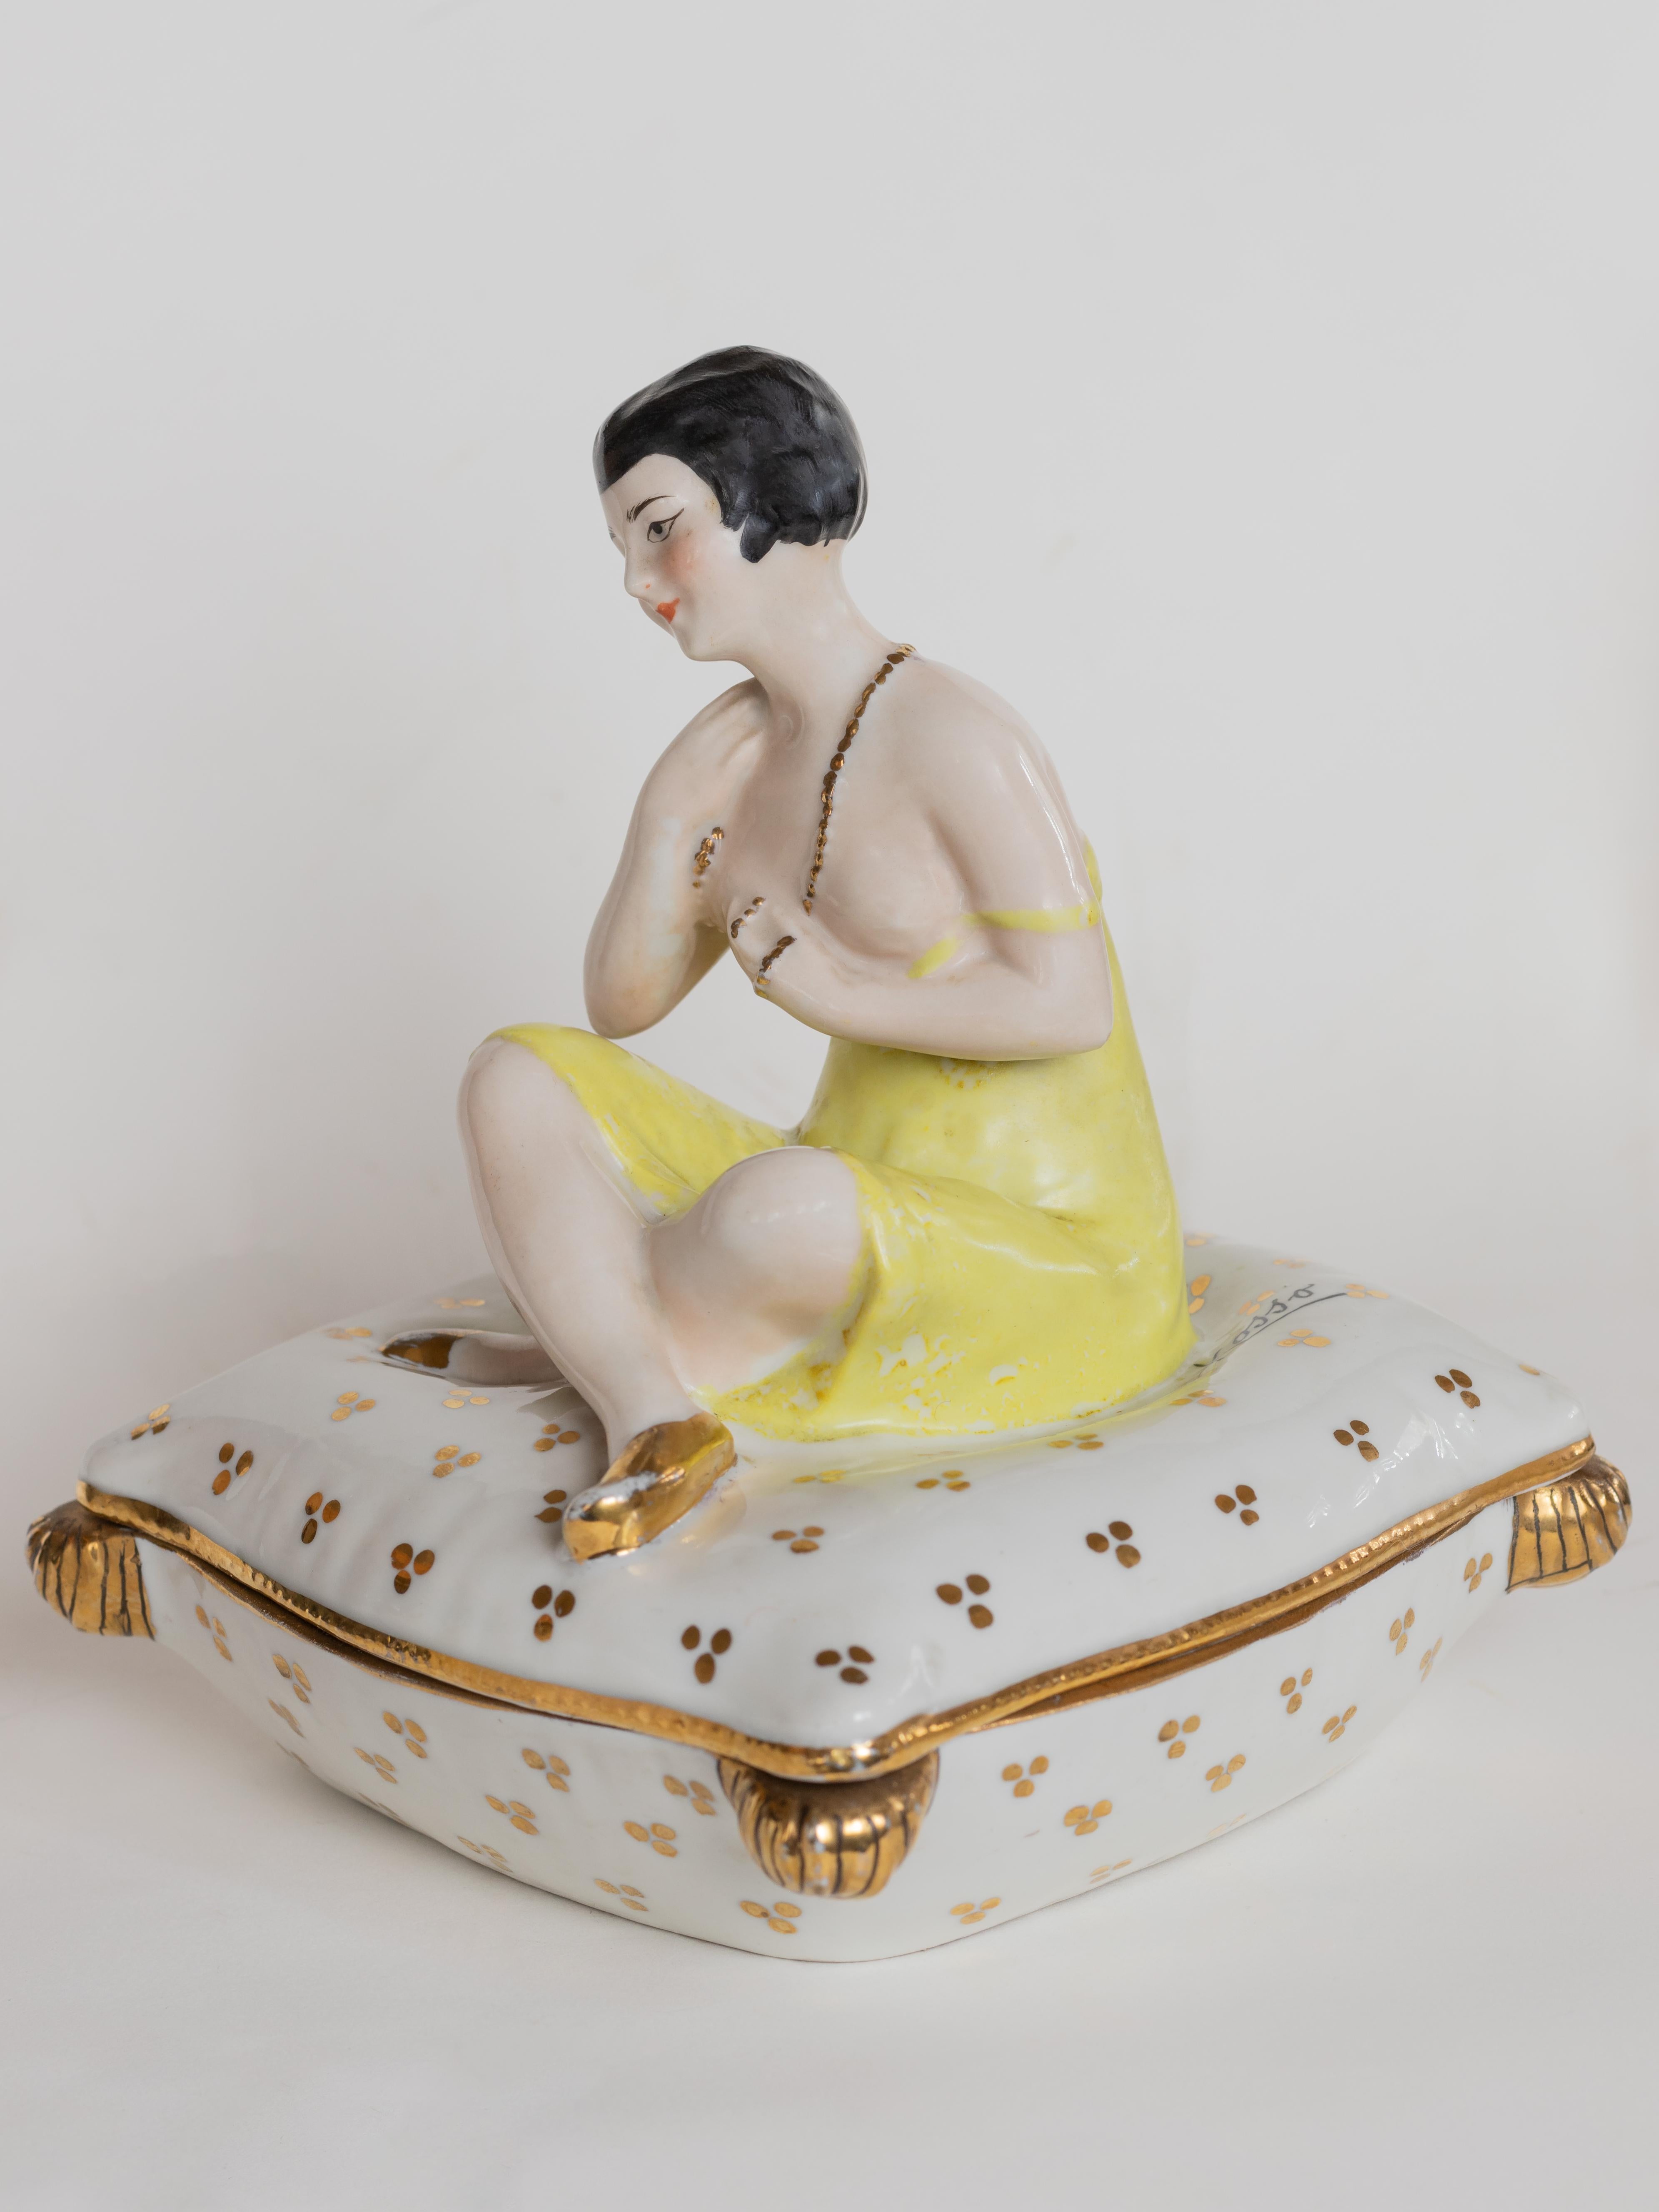 A beautifully crafted Art Deco powder box or jewelry box, adorned with a delicate figurine of a woman in a yellow dress, resting on a plush cushion sofa. The piece bears the mark 